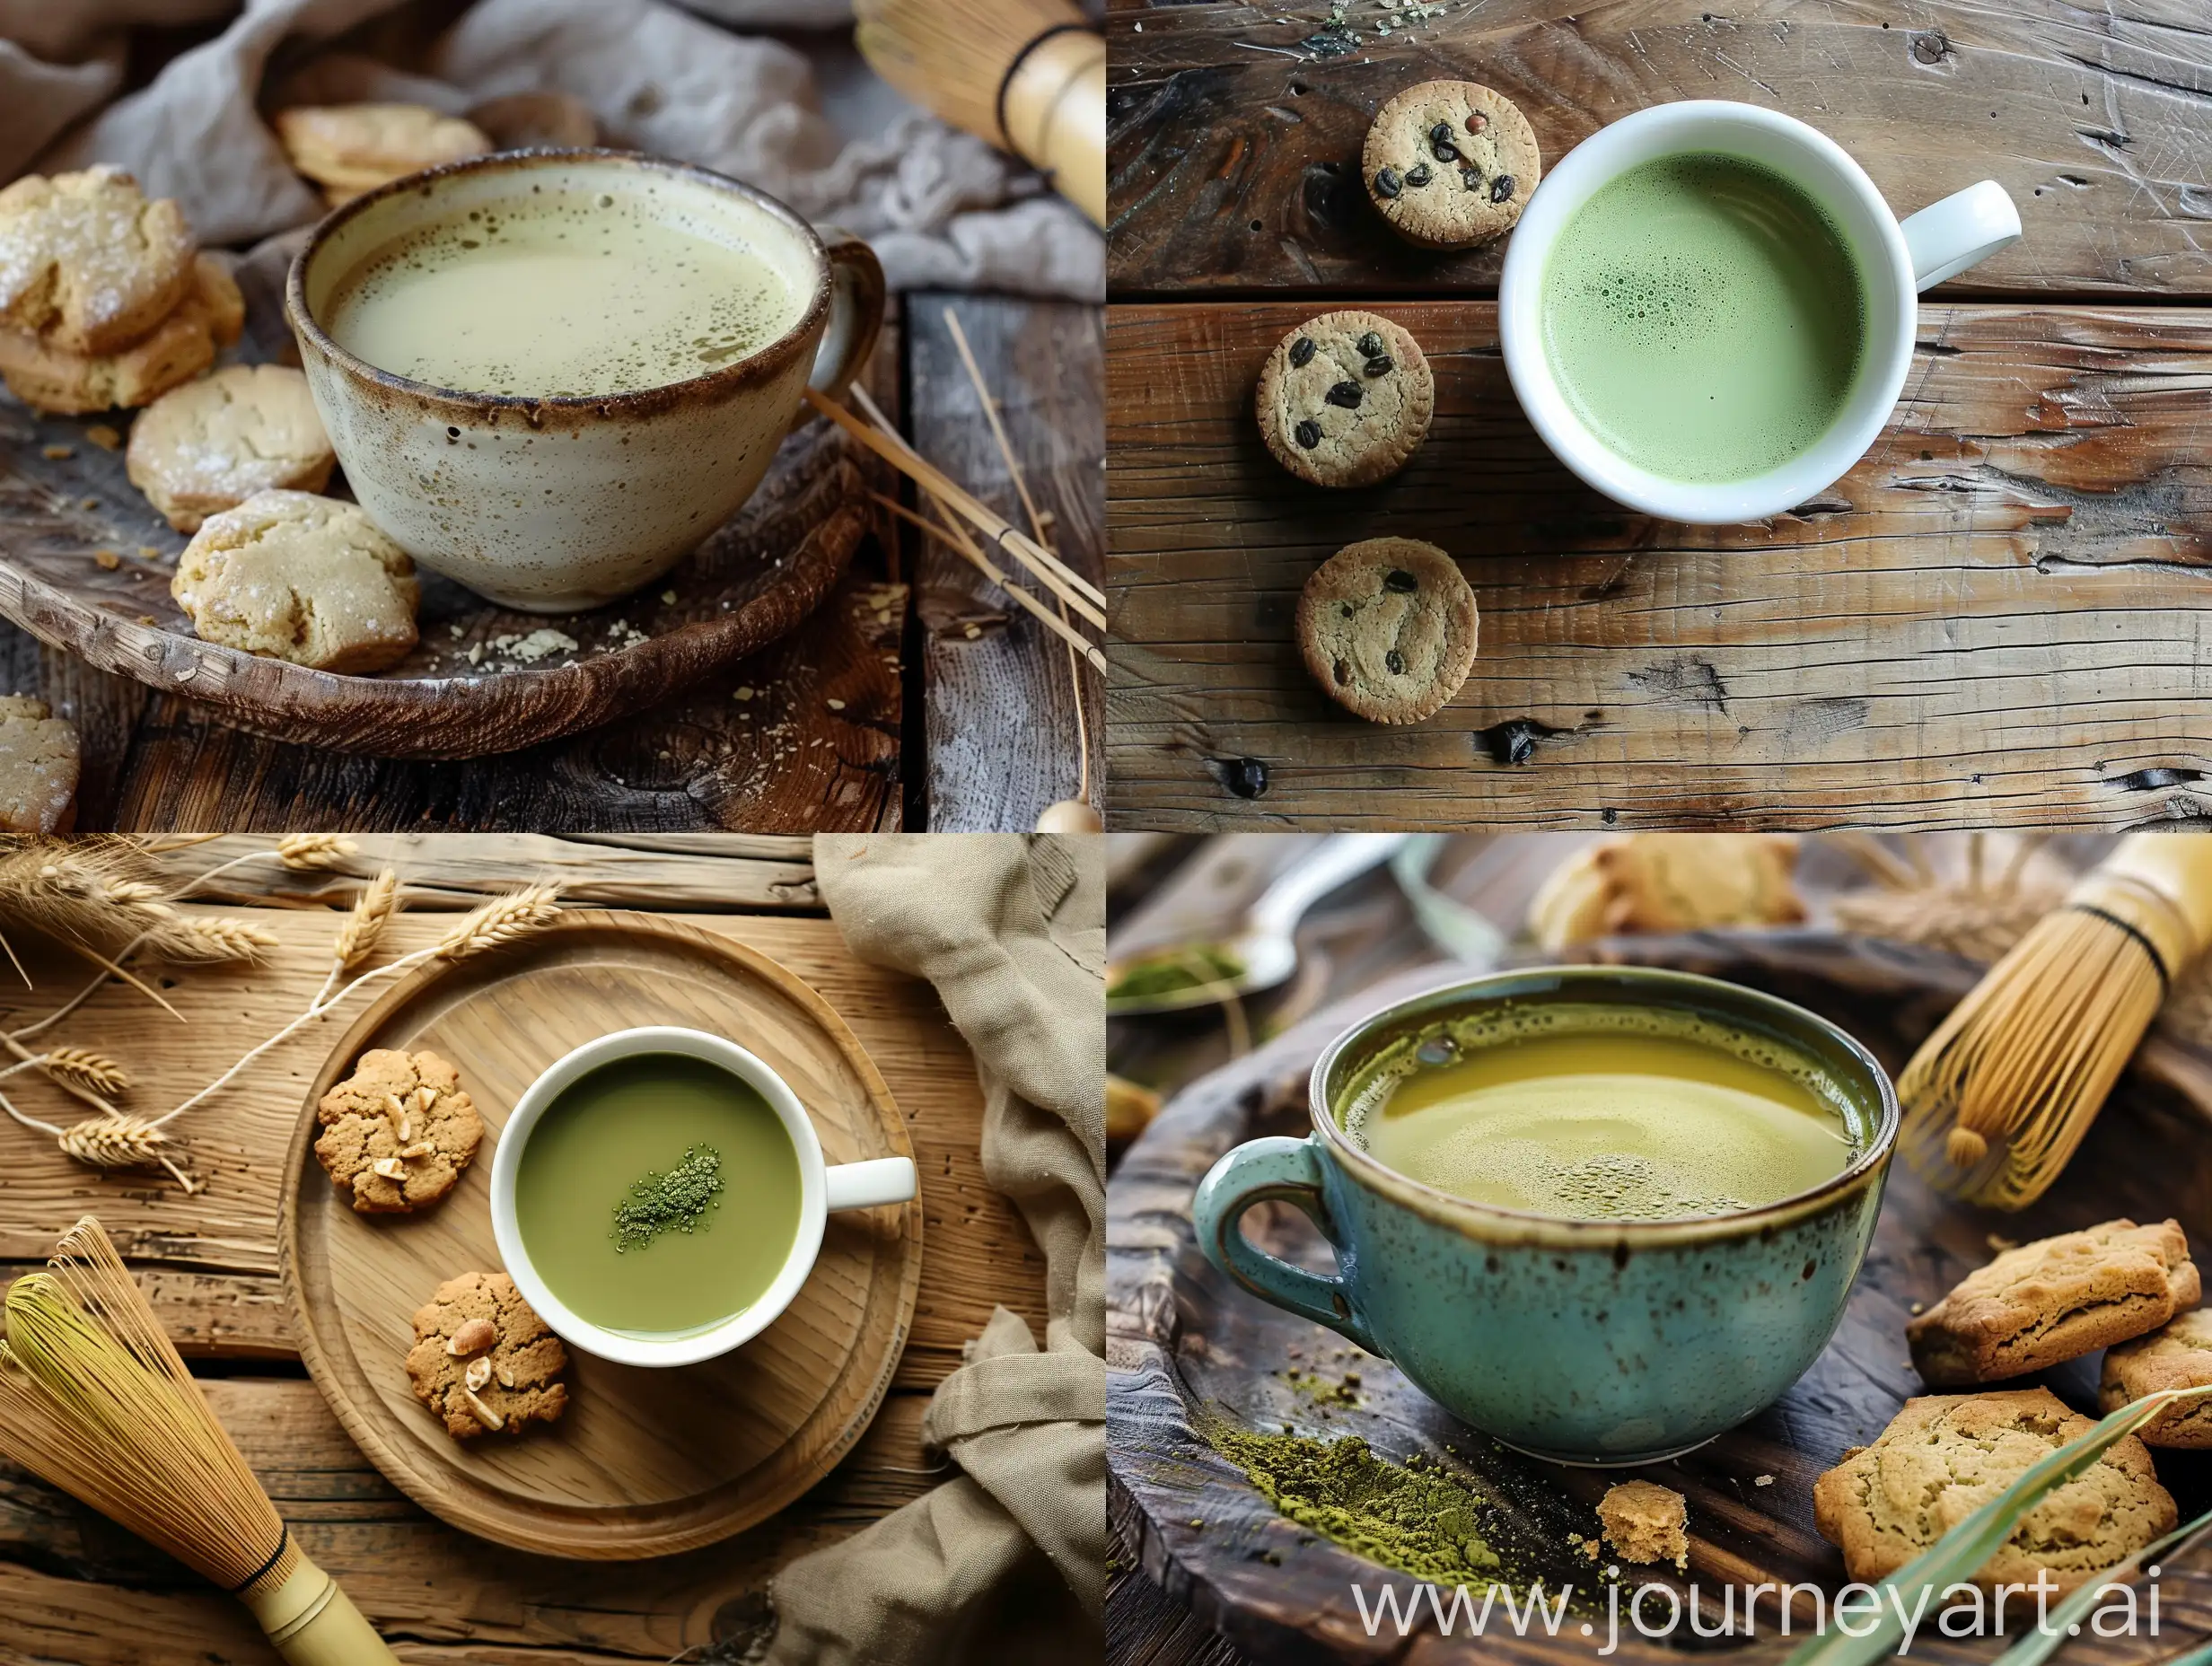 Matcha-Green-Tea-and-Biscuits-on-Wooden-Table